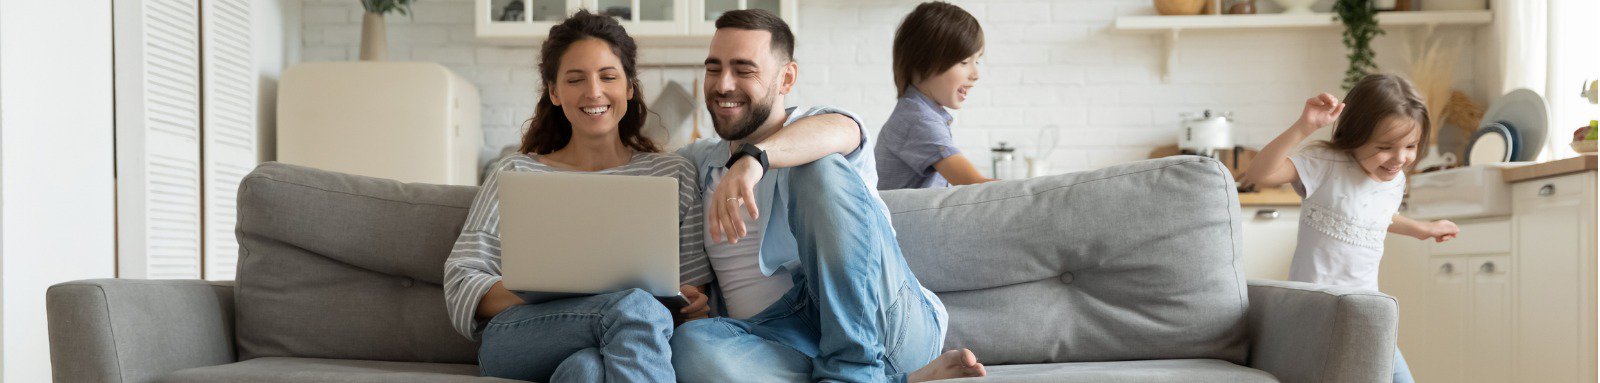 Couple on couch using computer while kids run past